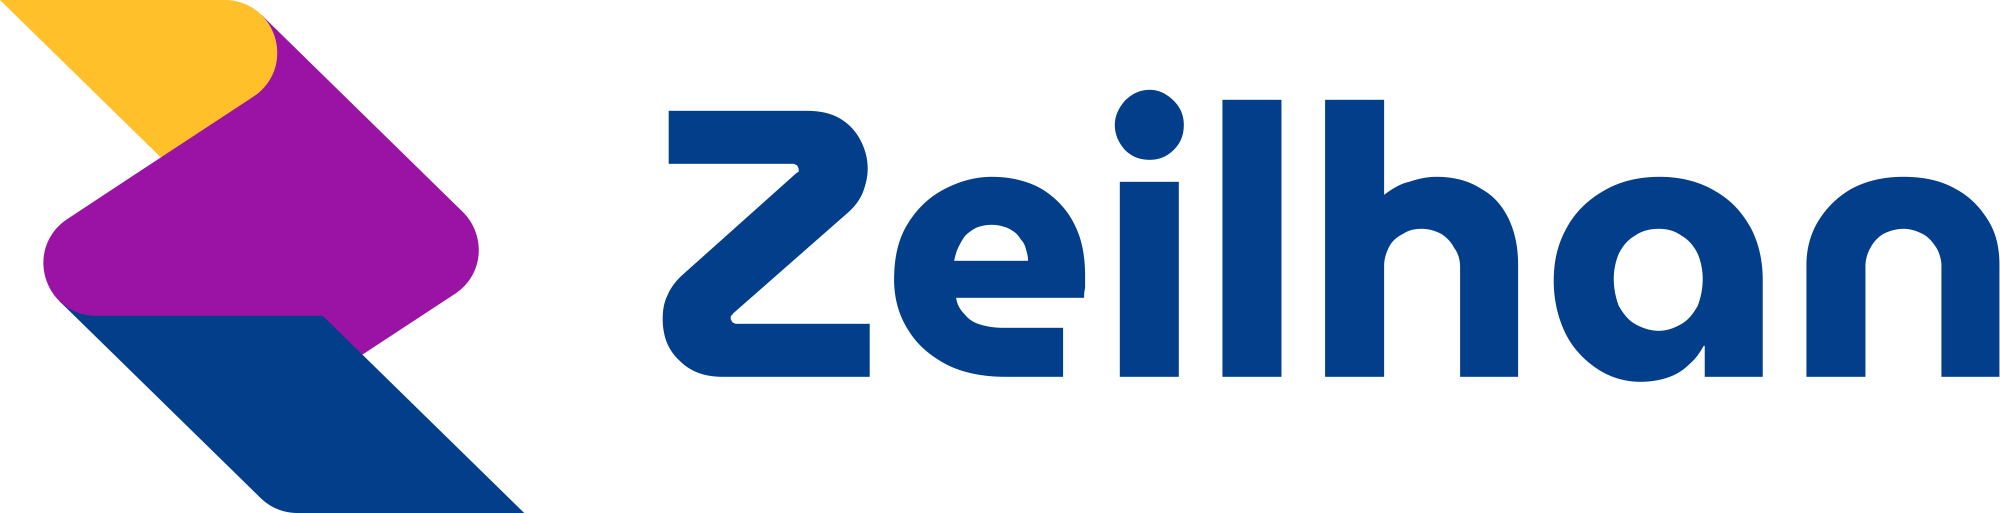 Zeilhan Official Colored Logo